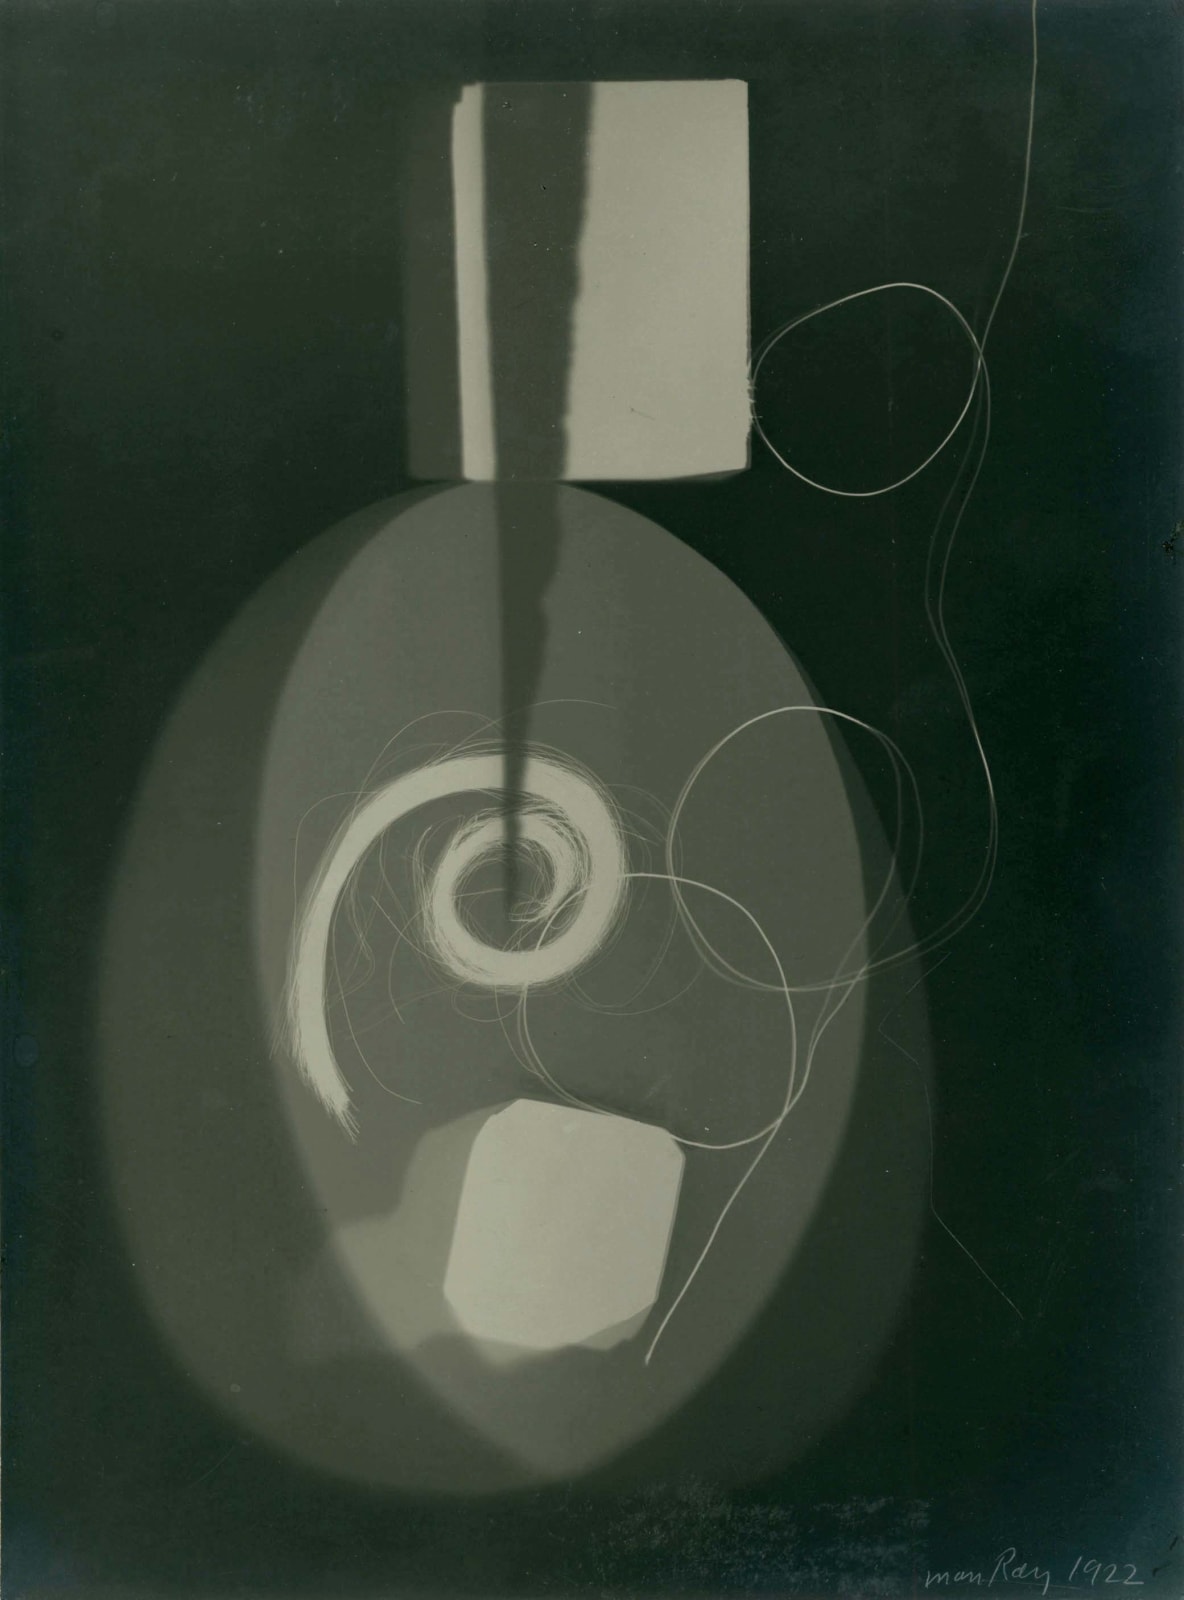 Man Ray, Rayograph with lock of hair, 1922